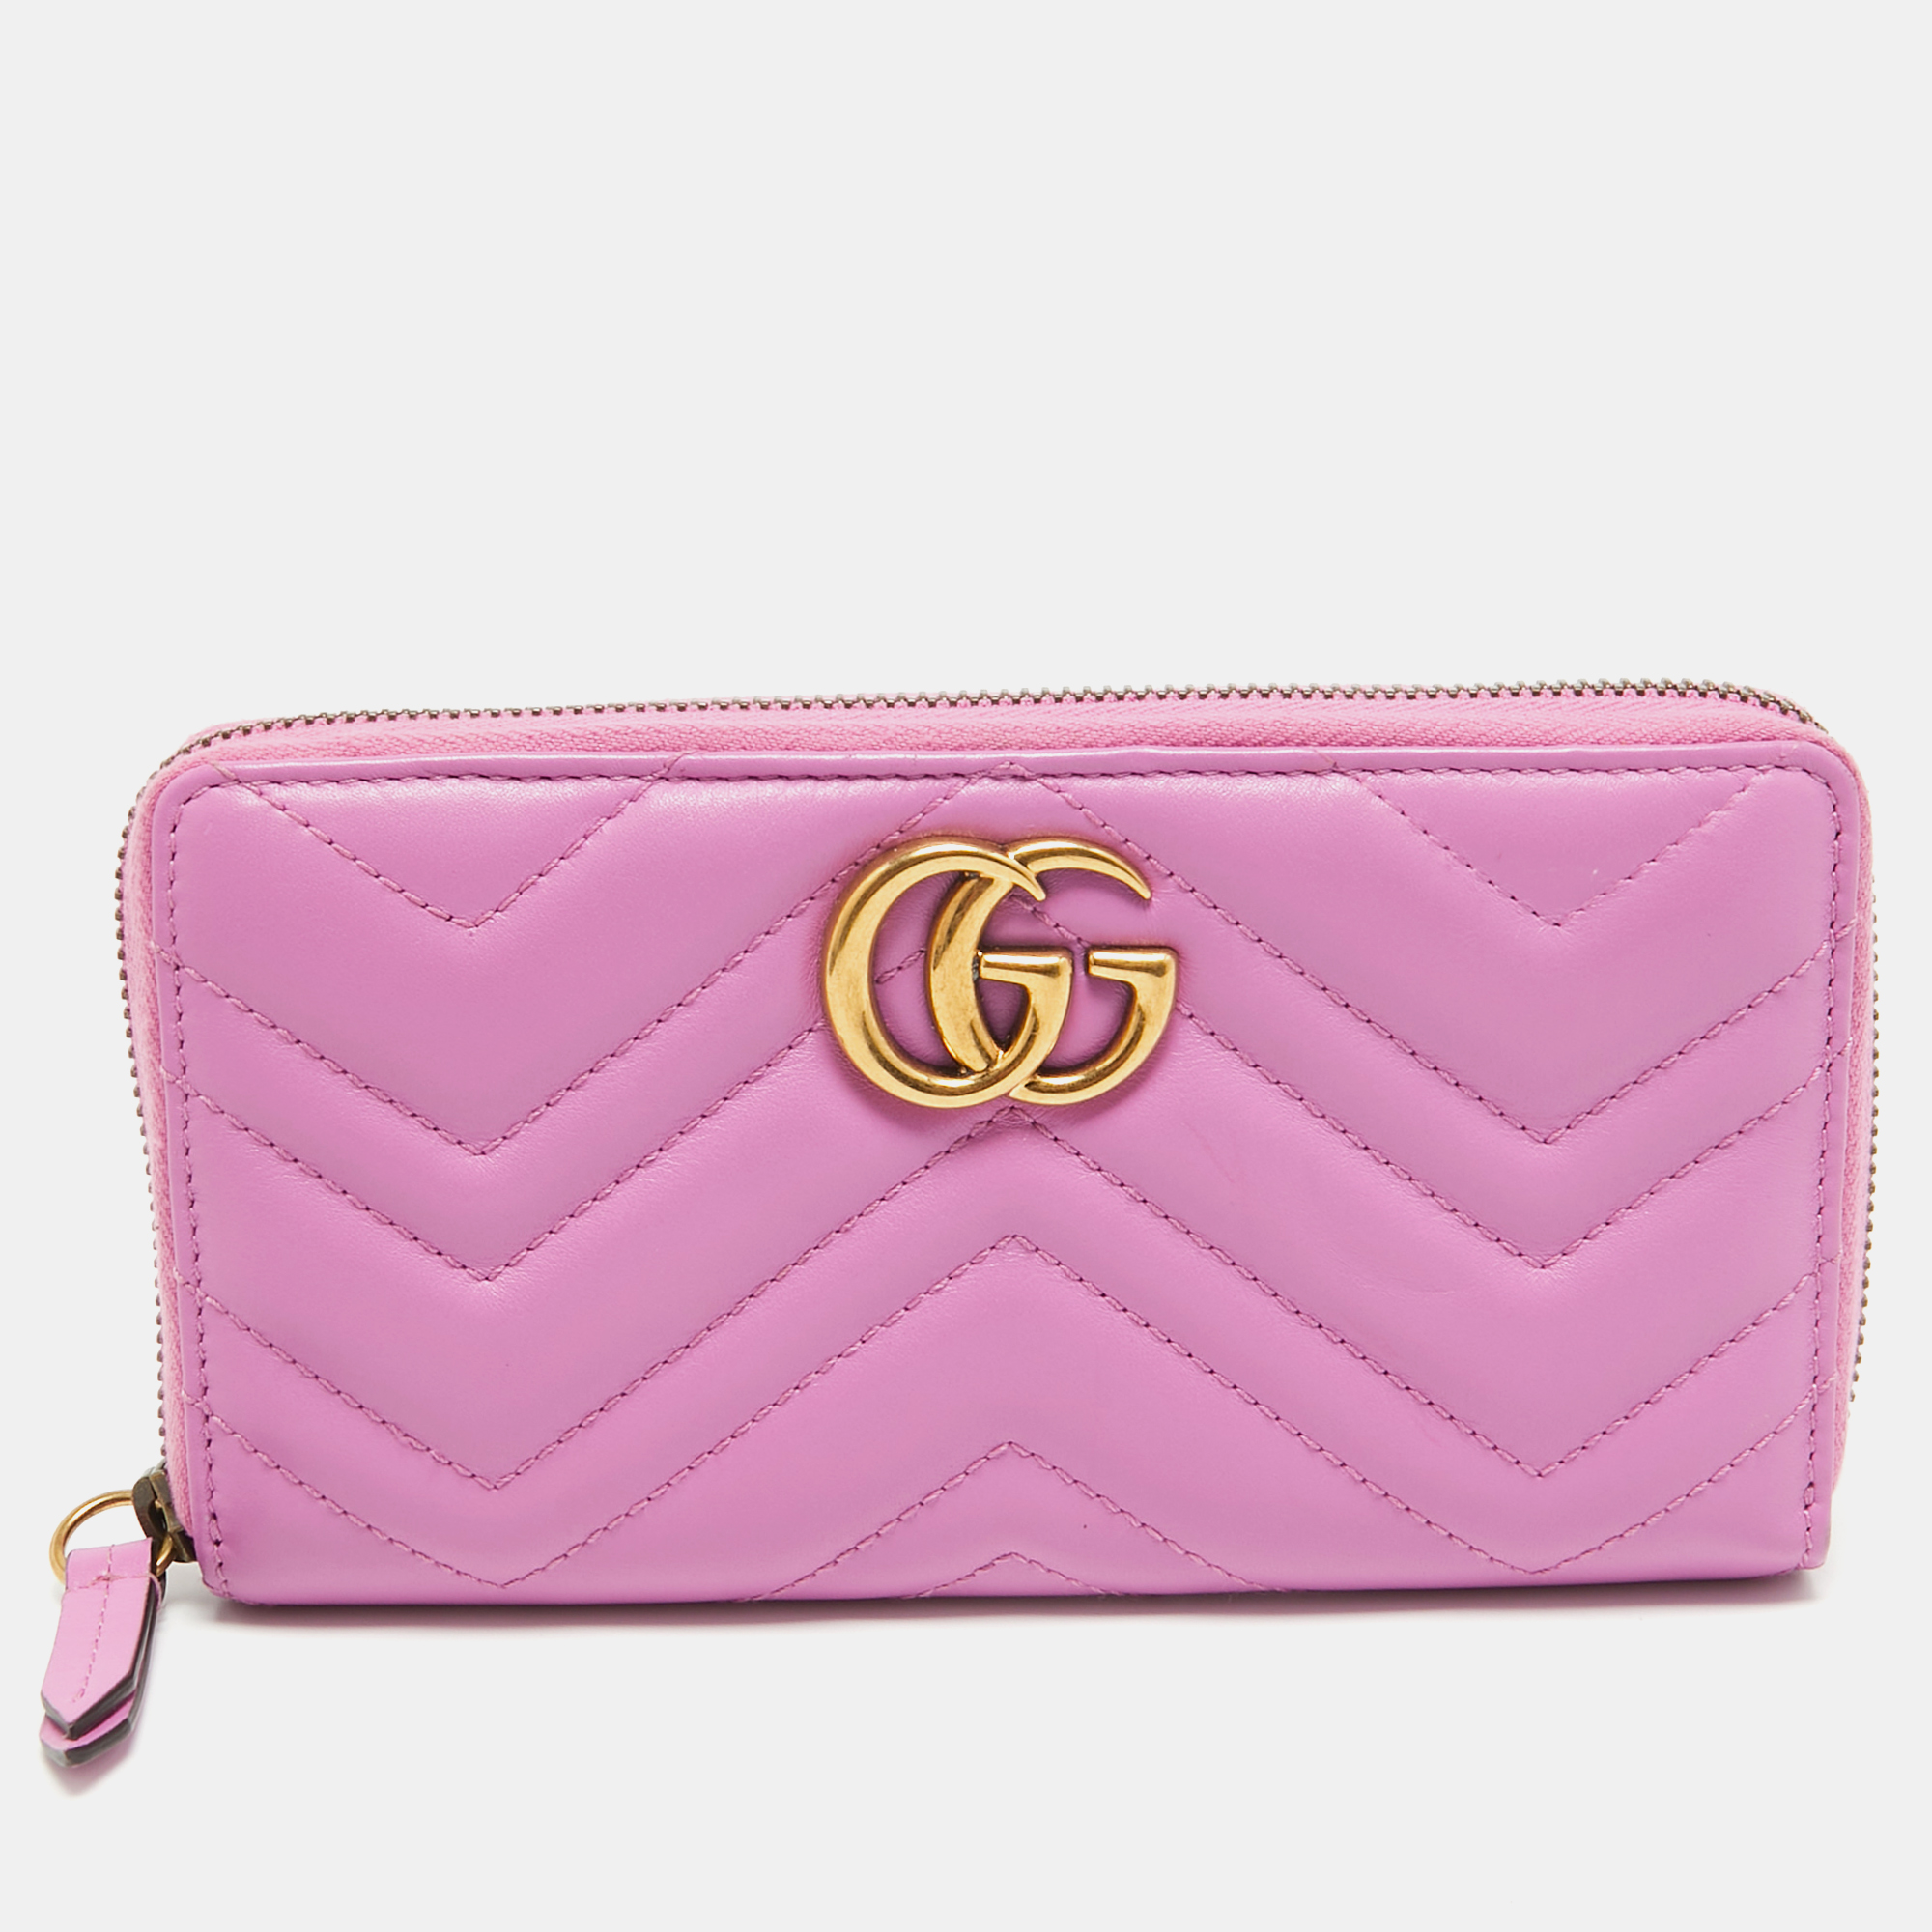 

Gucci Pink Matelassé Leather GG Marmont Zip Around Wallet